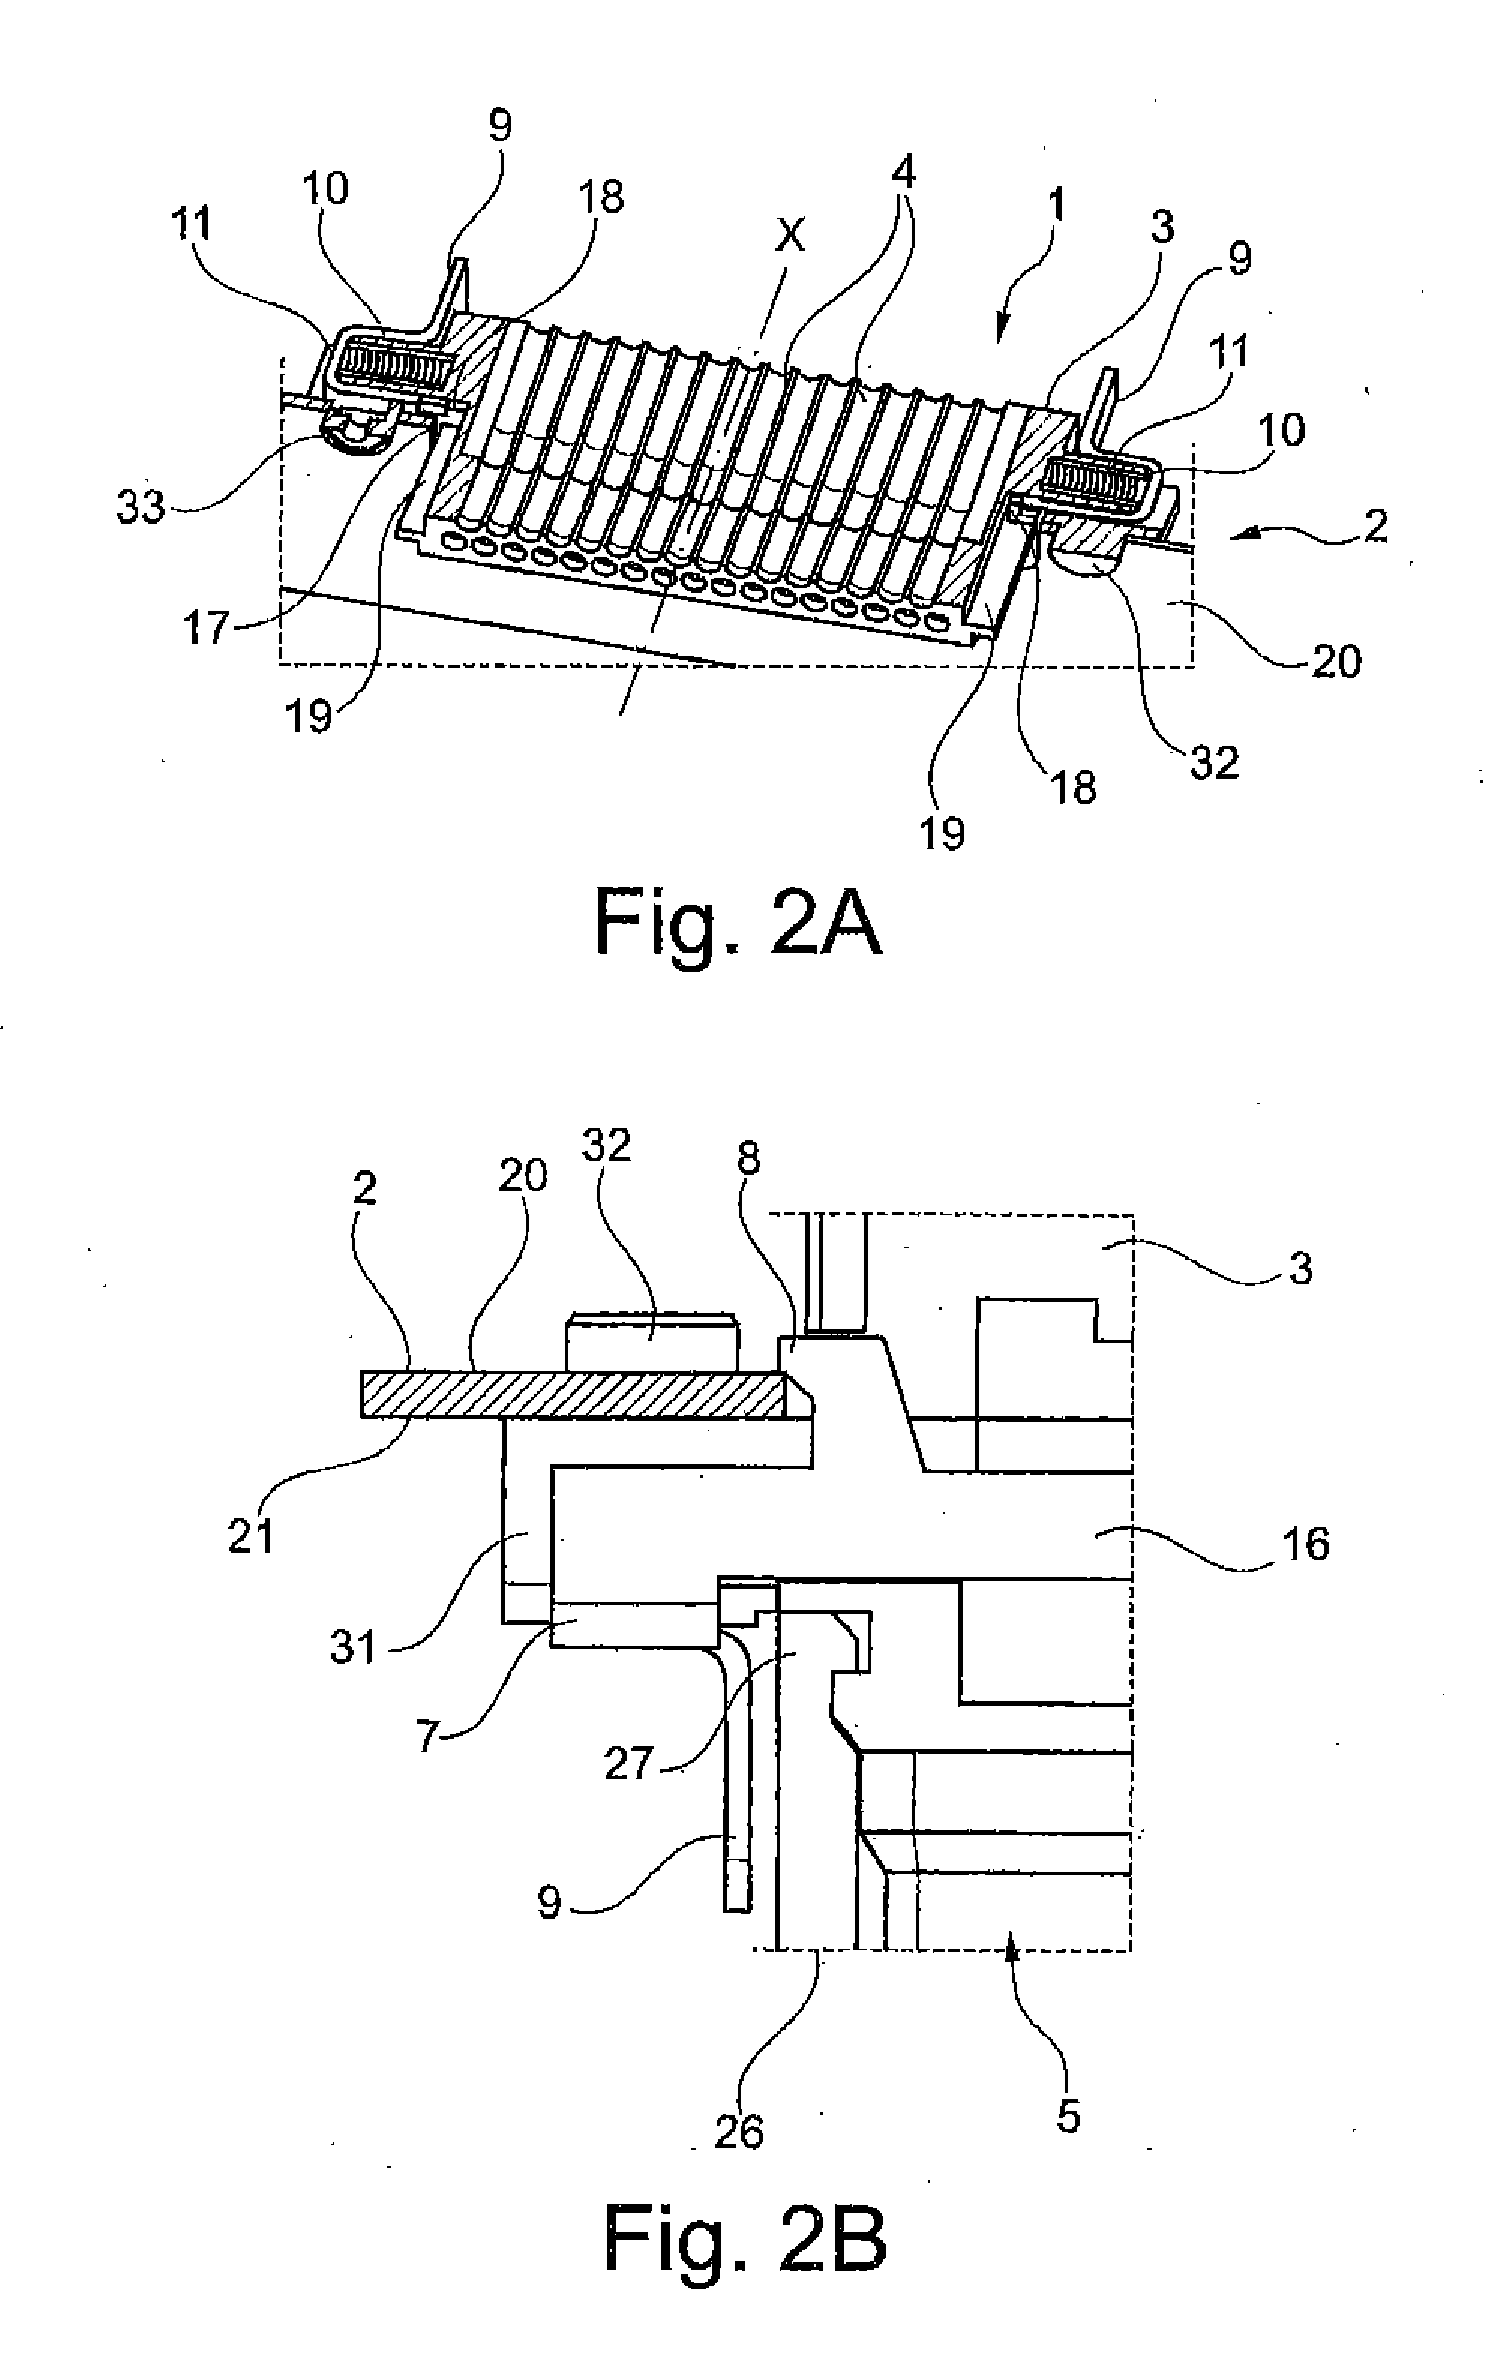 Multi-contact connector socket for rapid fastening to a panel, and associated installation and removal methods